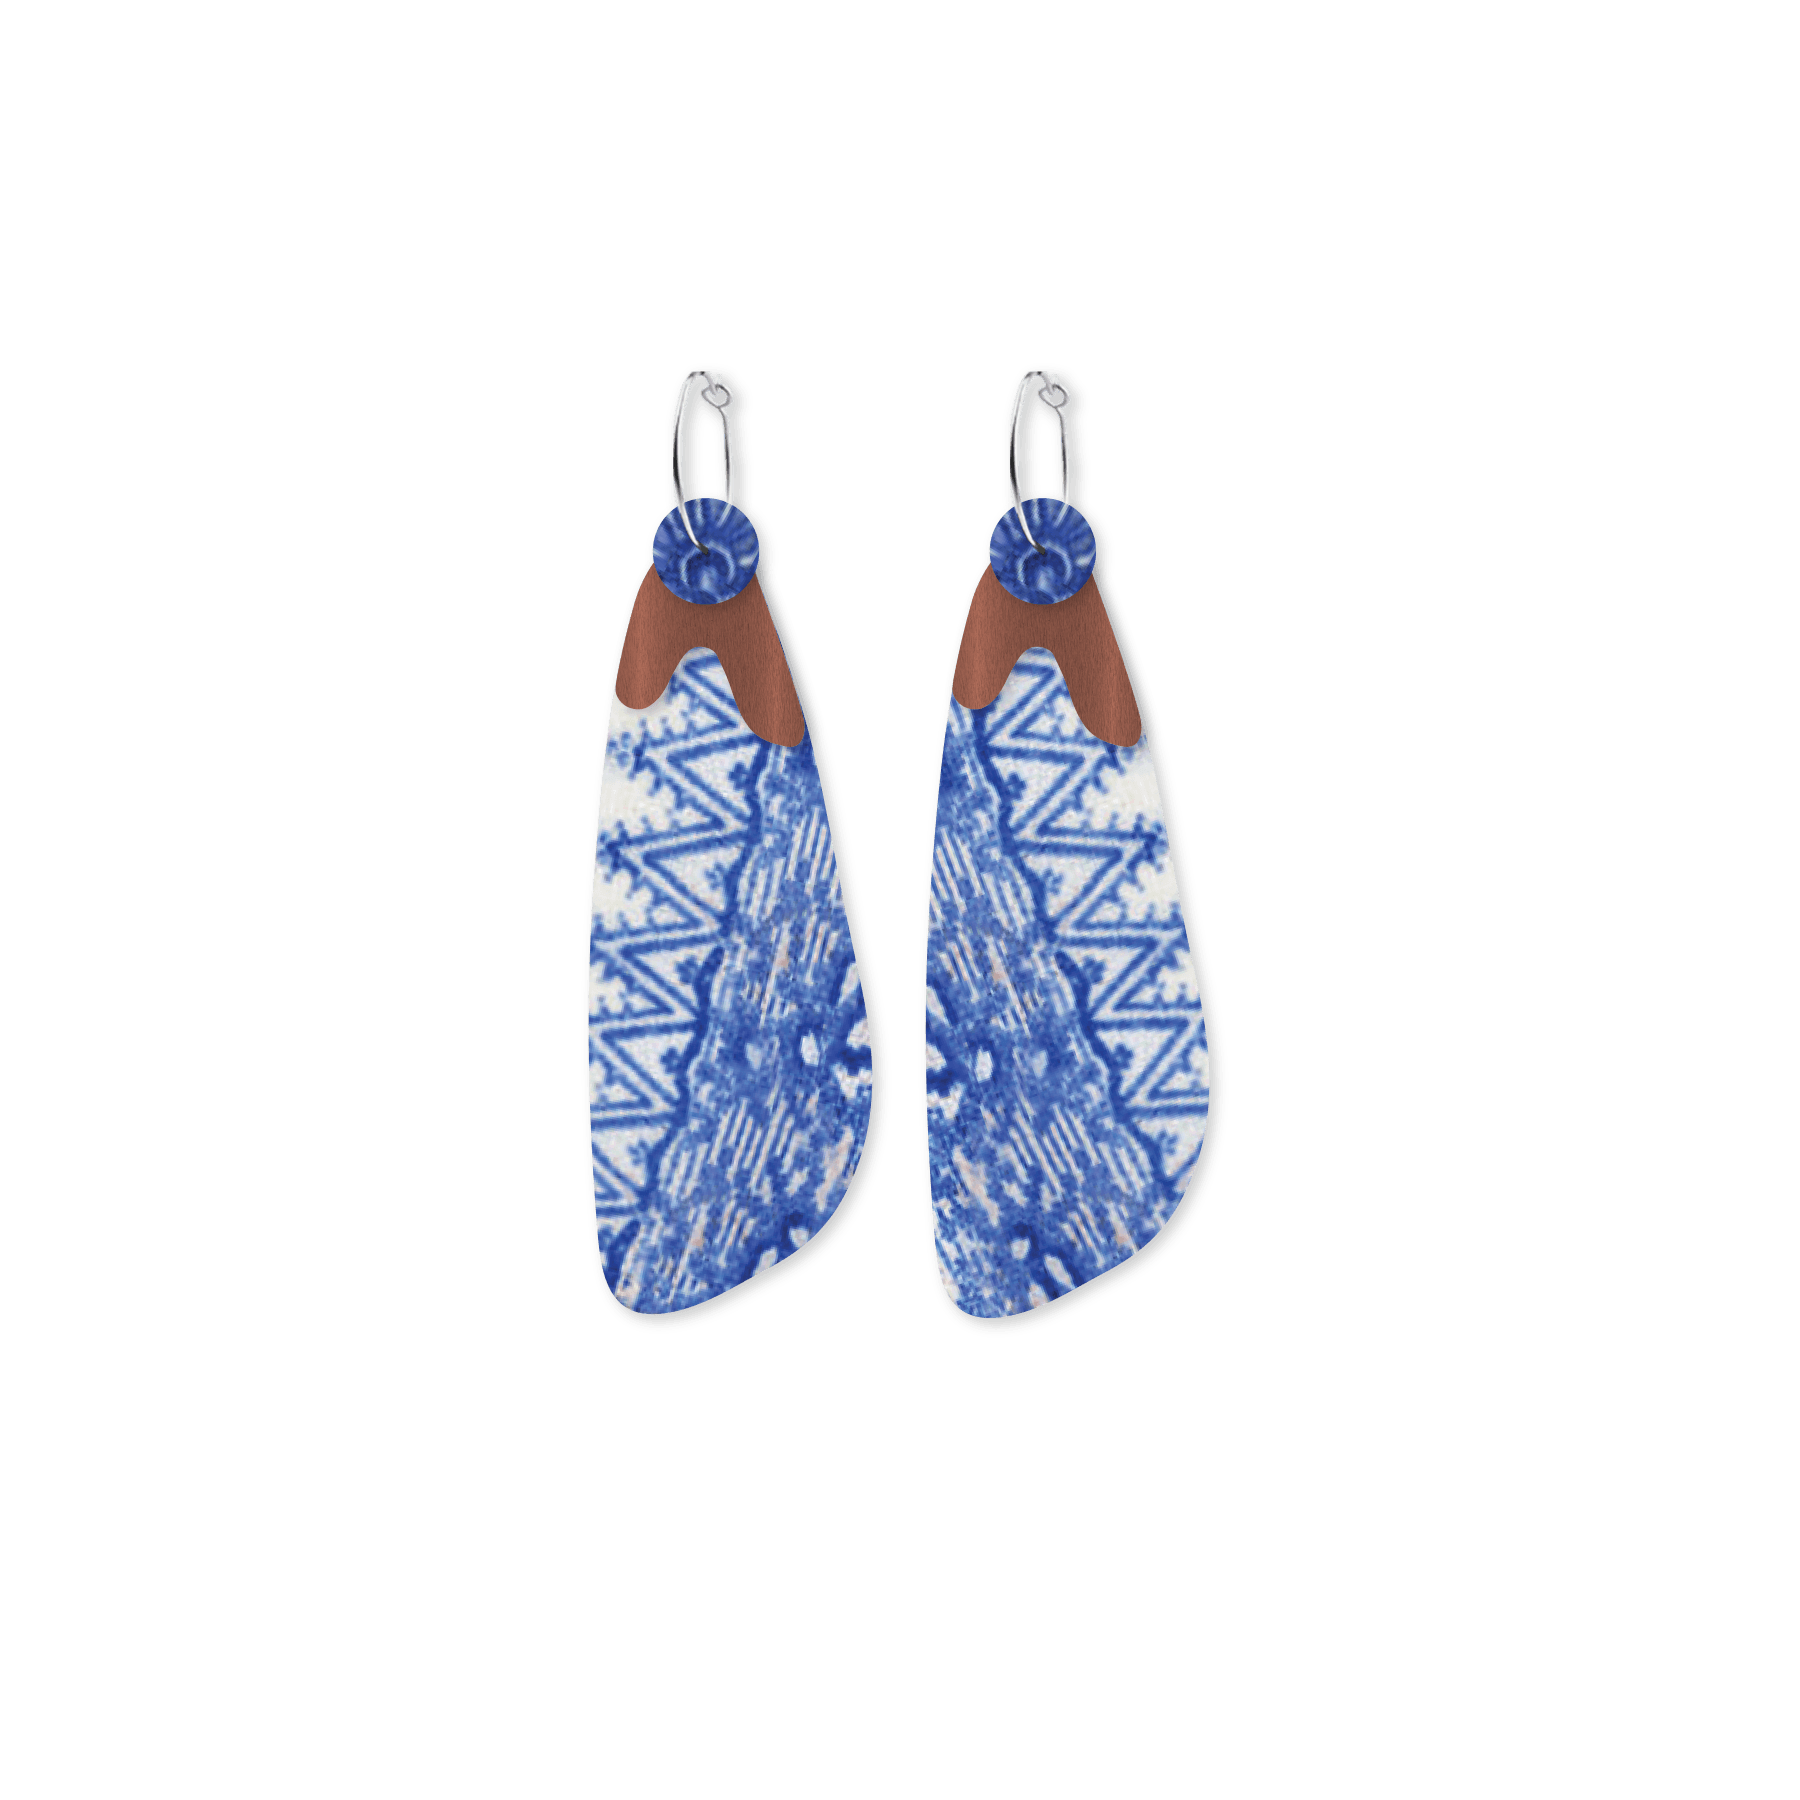 Museums of History NSW Ceramic Layered Paddle Hoop Earrings